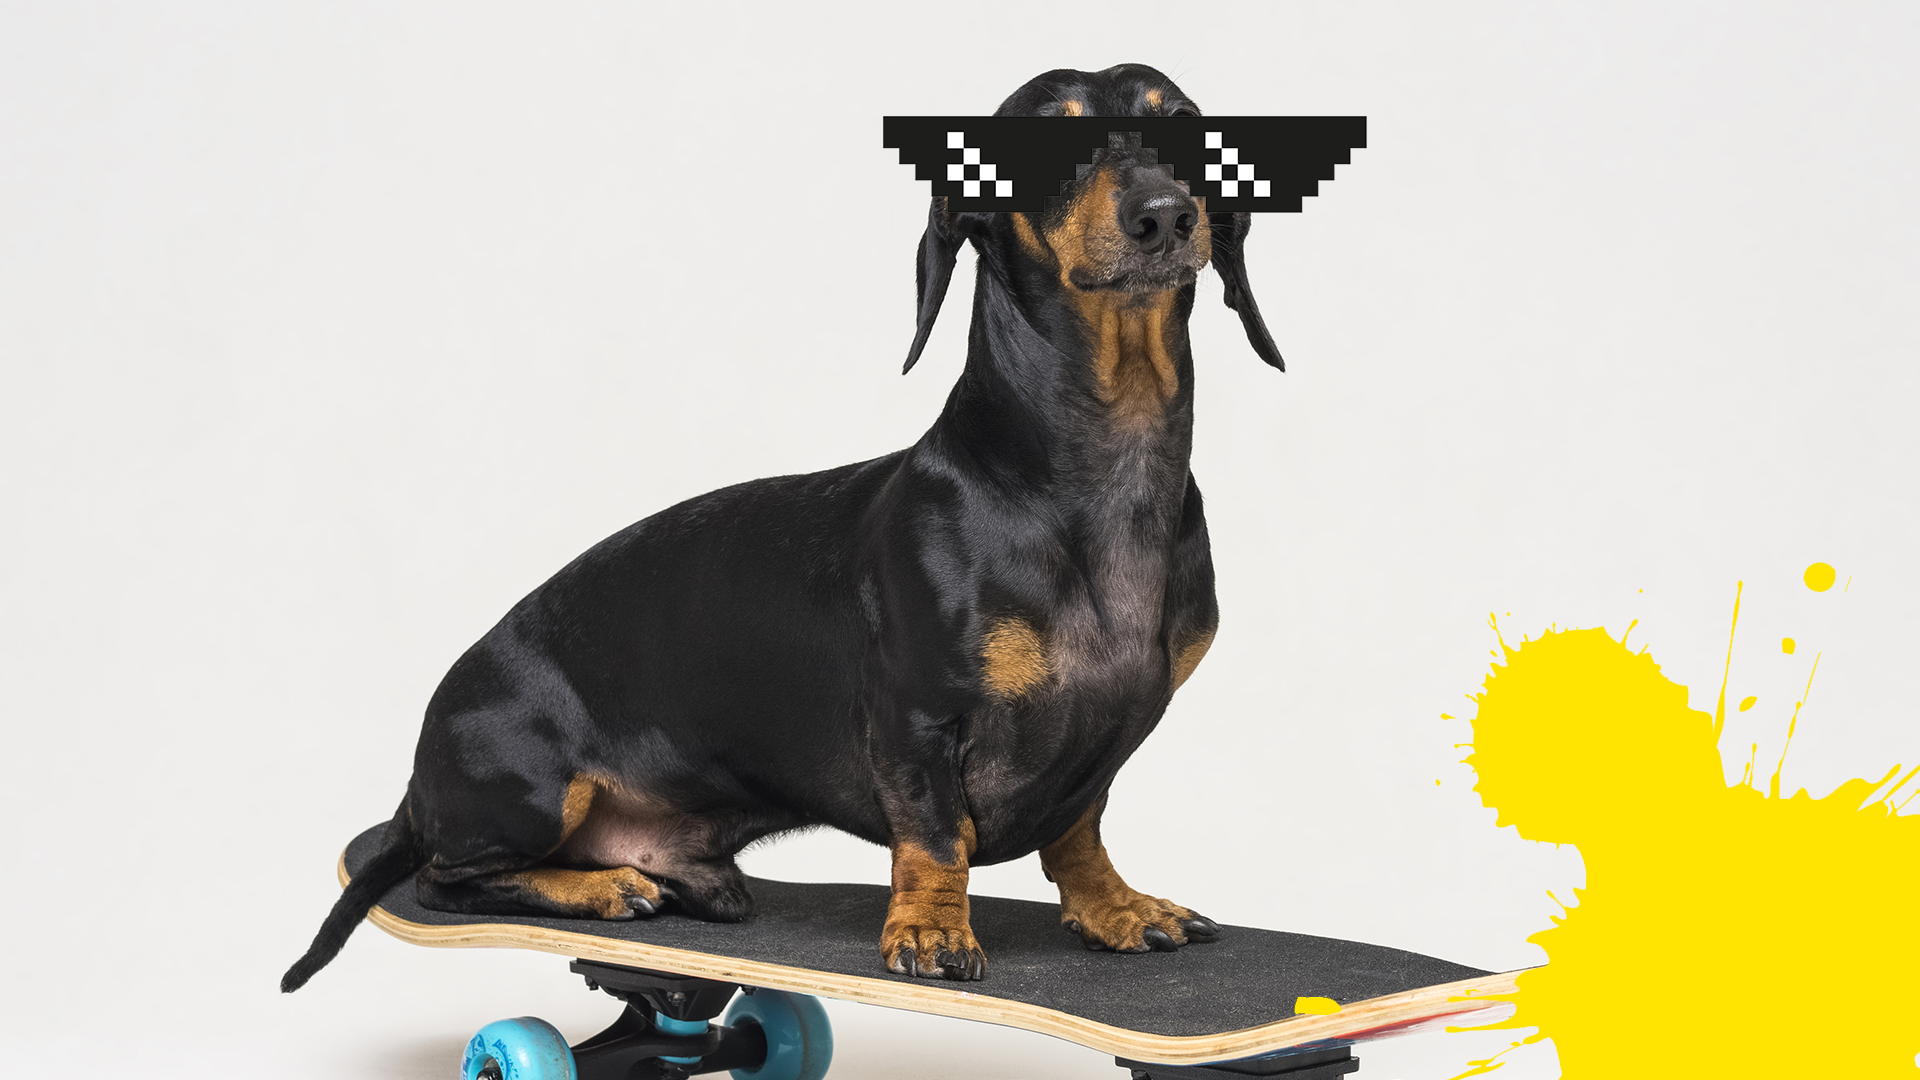 Dog on skateboard with sunglasses and splat